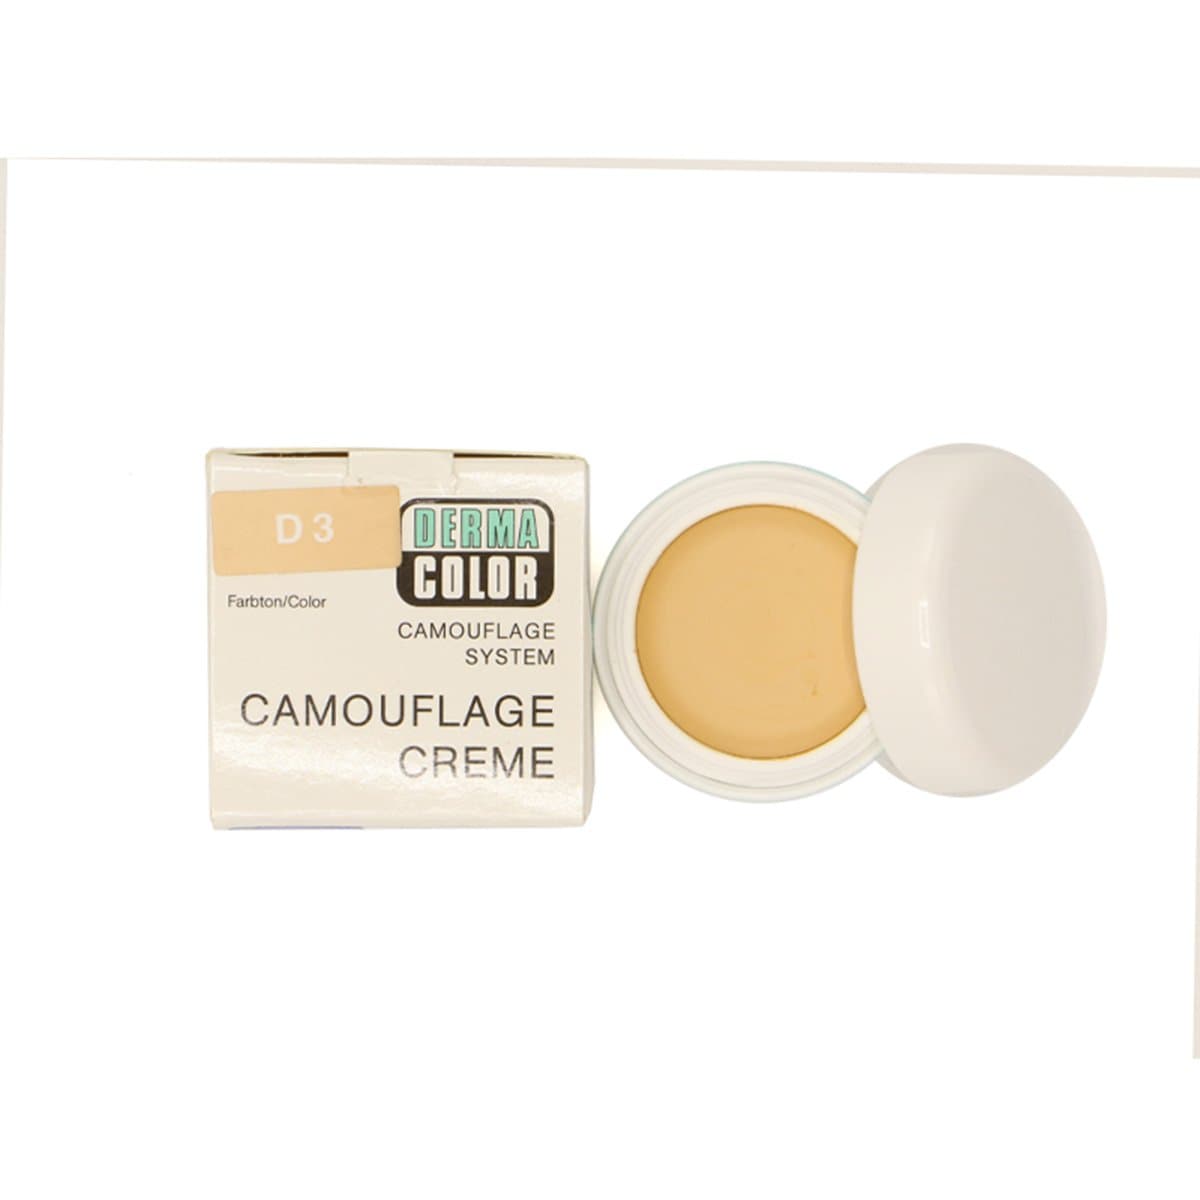 Kryolan Derma Color Camouflage Creme Refill - D3 4 gm - Premium Health & Beauty from Kryolan - Just Rs 4050.00! Shop now at Cozmetica